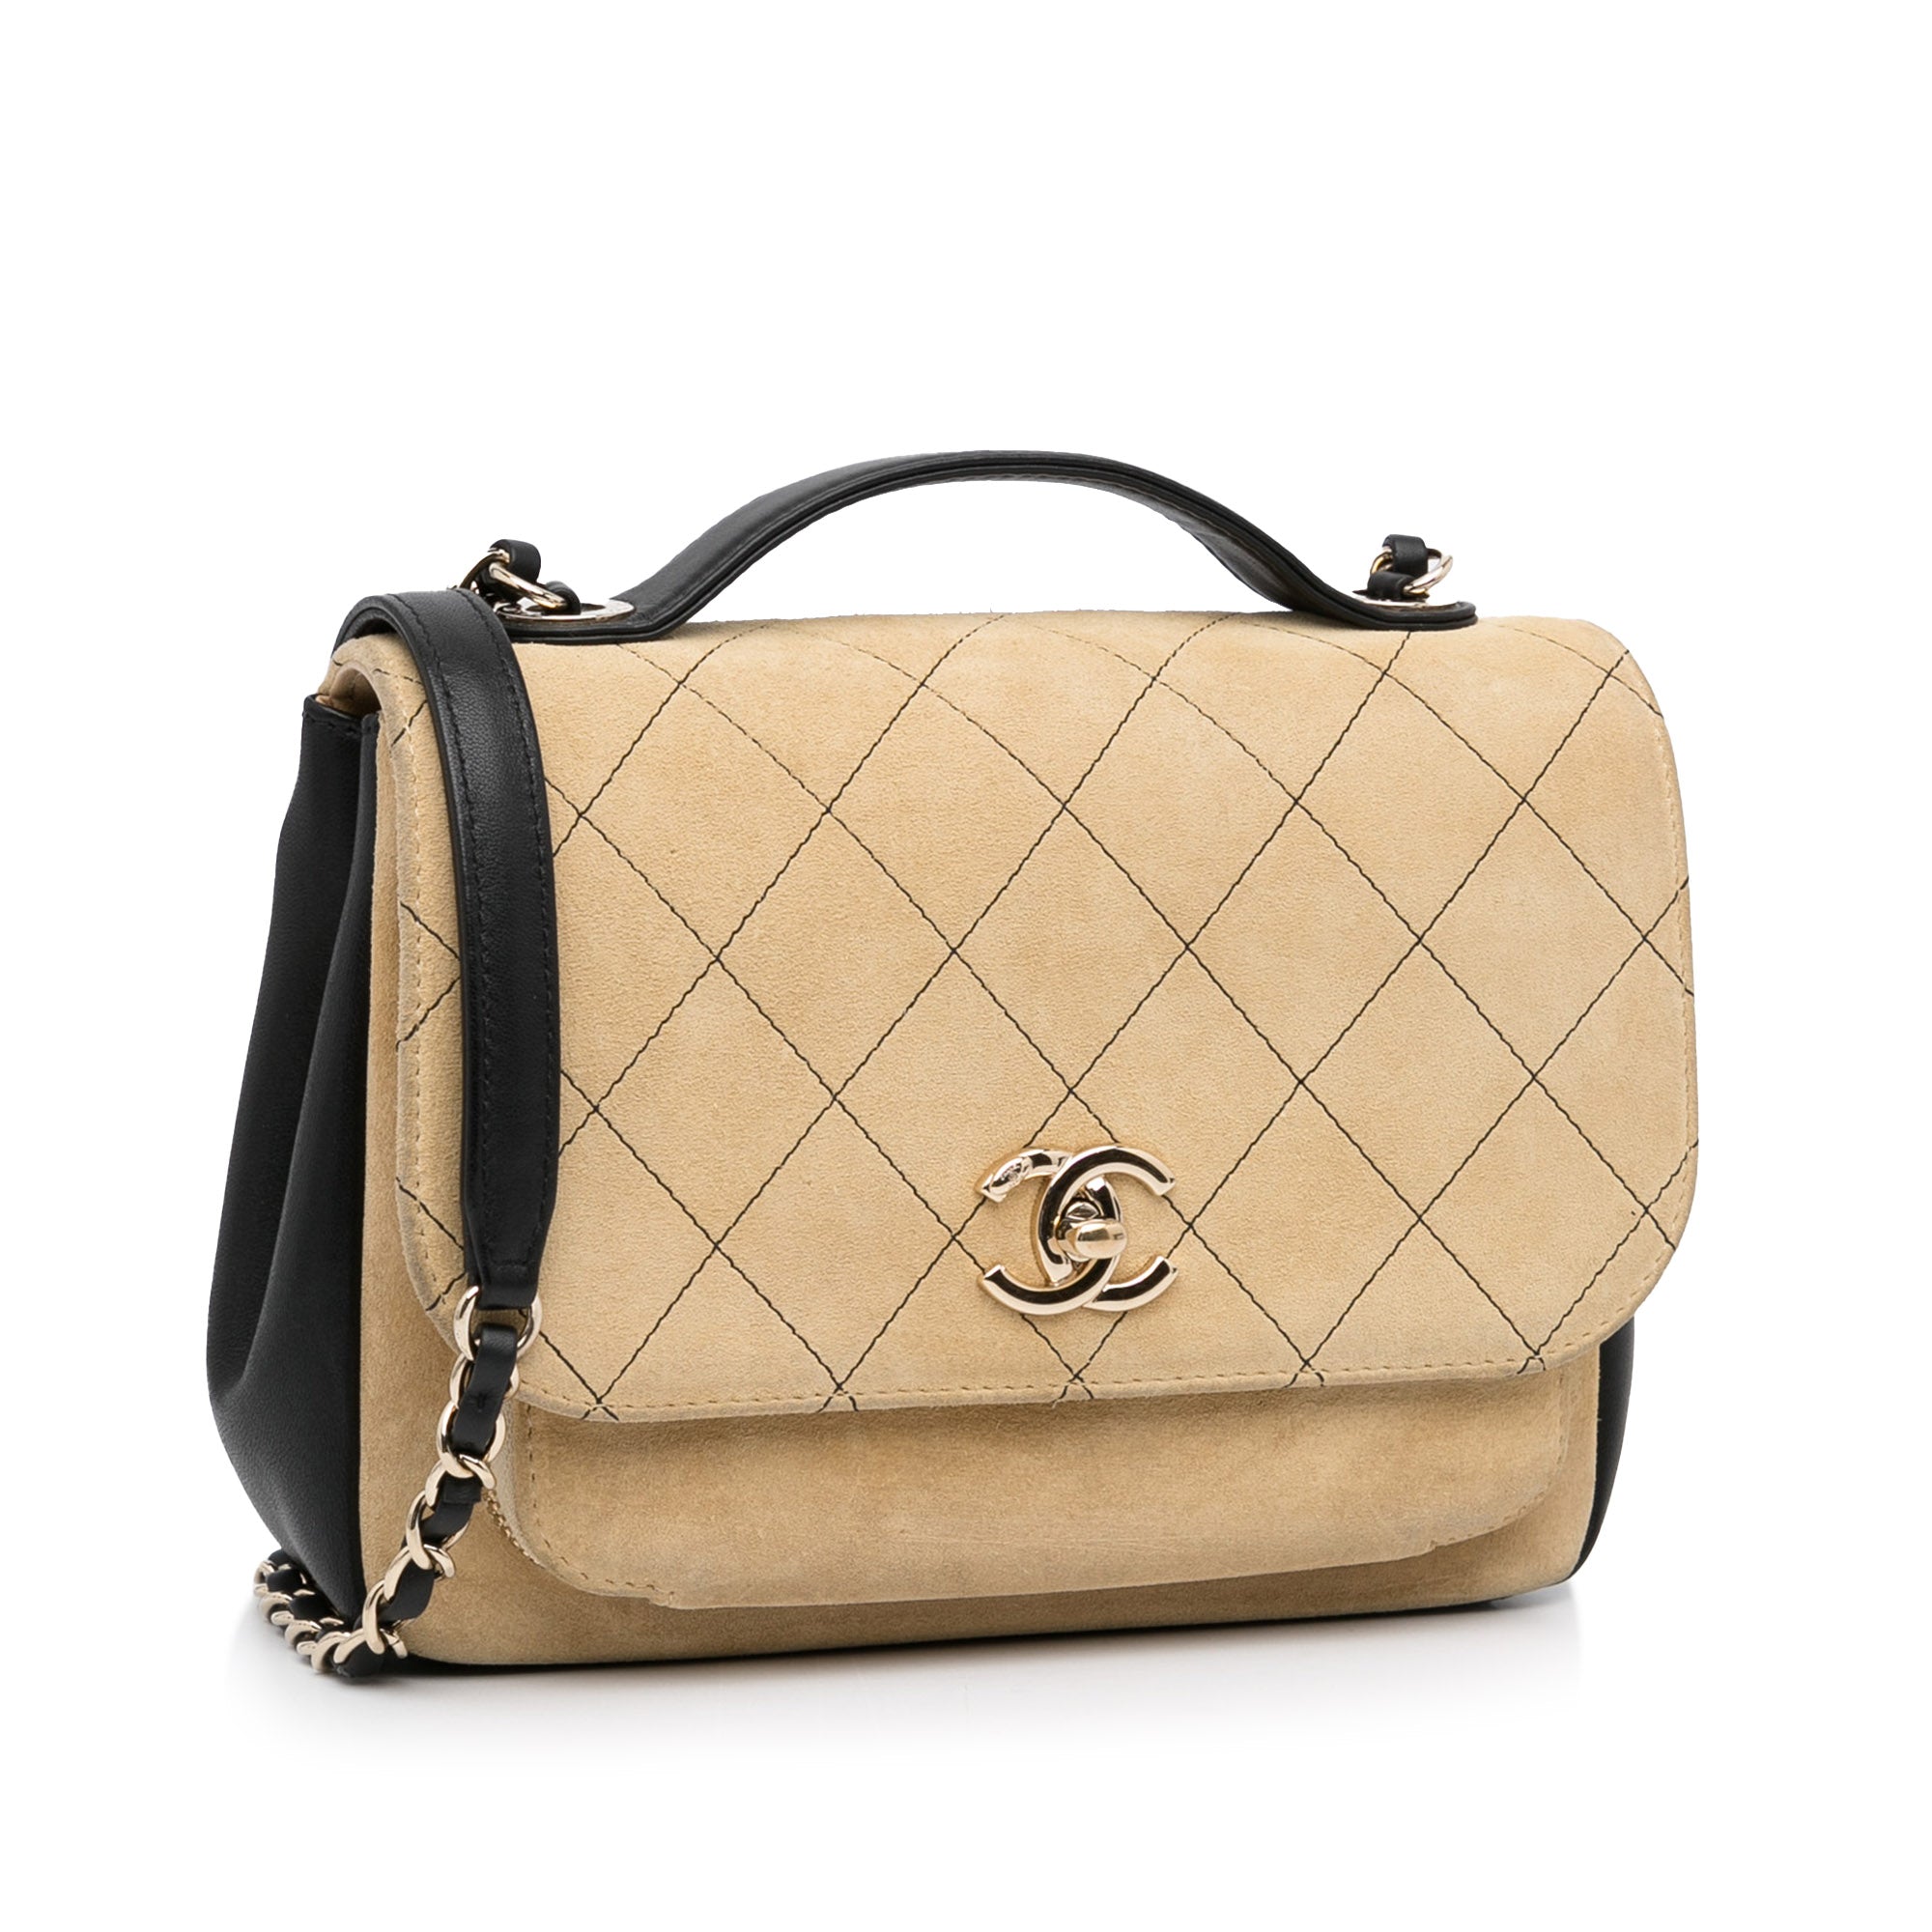 Business affinity leather crossbody bag Chanel Beige in Leather - 17153873